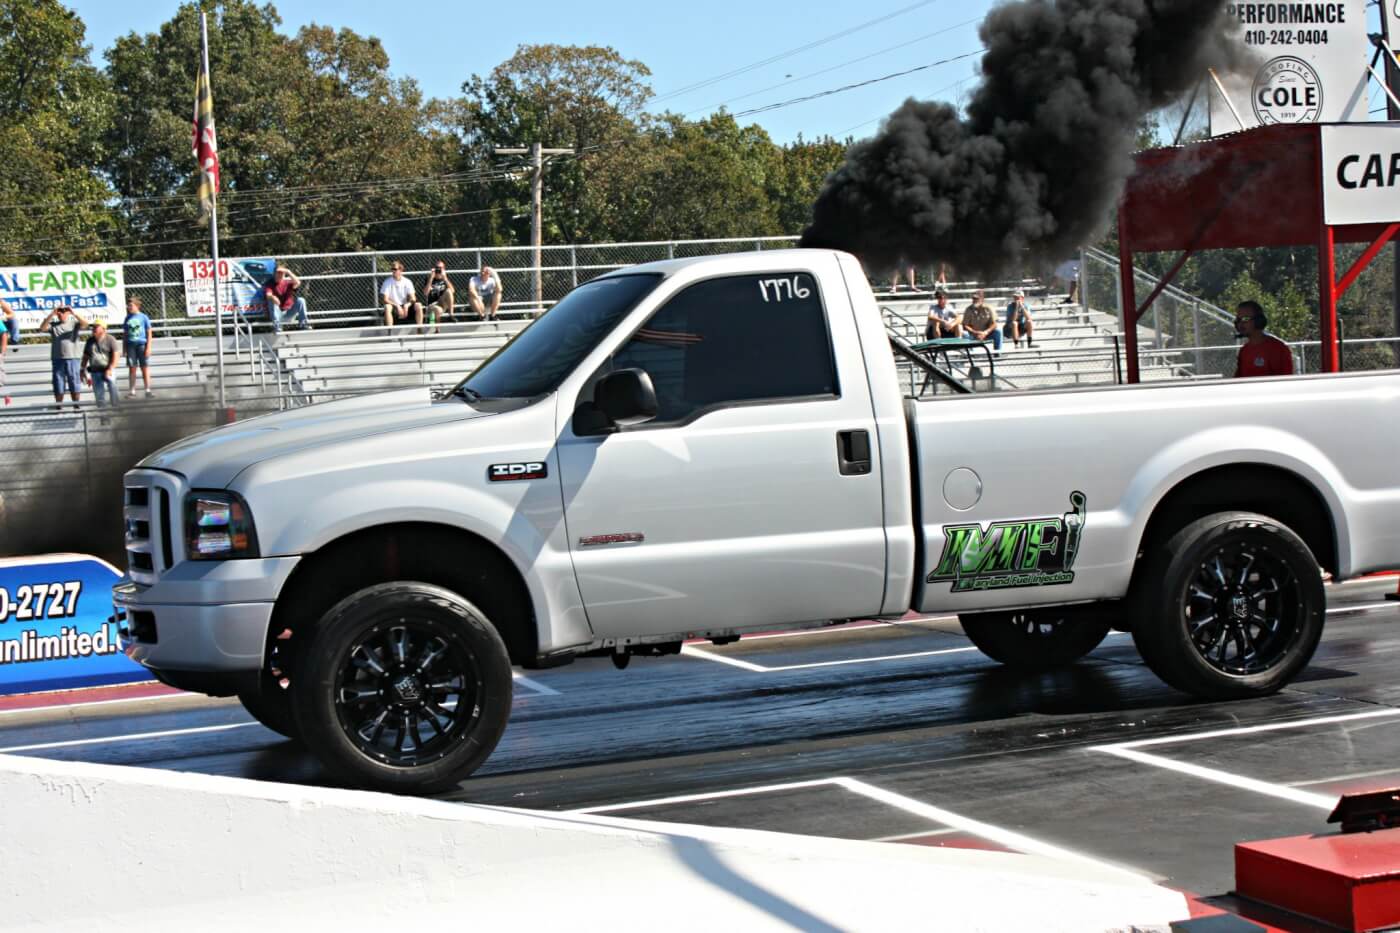 With both event hosts, Maryland Performance and Innovative Diesel, being known for their vast knowledge of the Ford Power Stroke, it was no surprise to see a huge turnout from the Blue Oval crowd. This 2005 F-250 was originally built by Innovative Diesel, but has since been sold to a local customer. The custom-fabricated triple turbochargers under the hood definitely help get this little hot rod from Point A to Point B in a hurry.